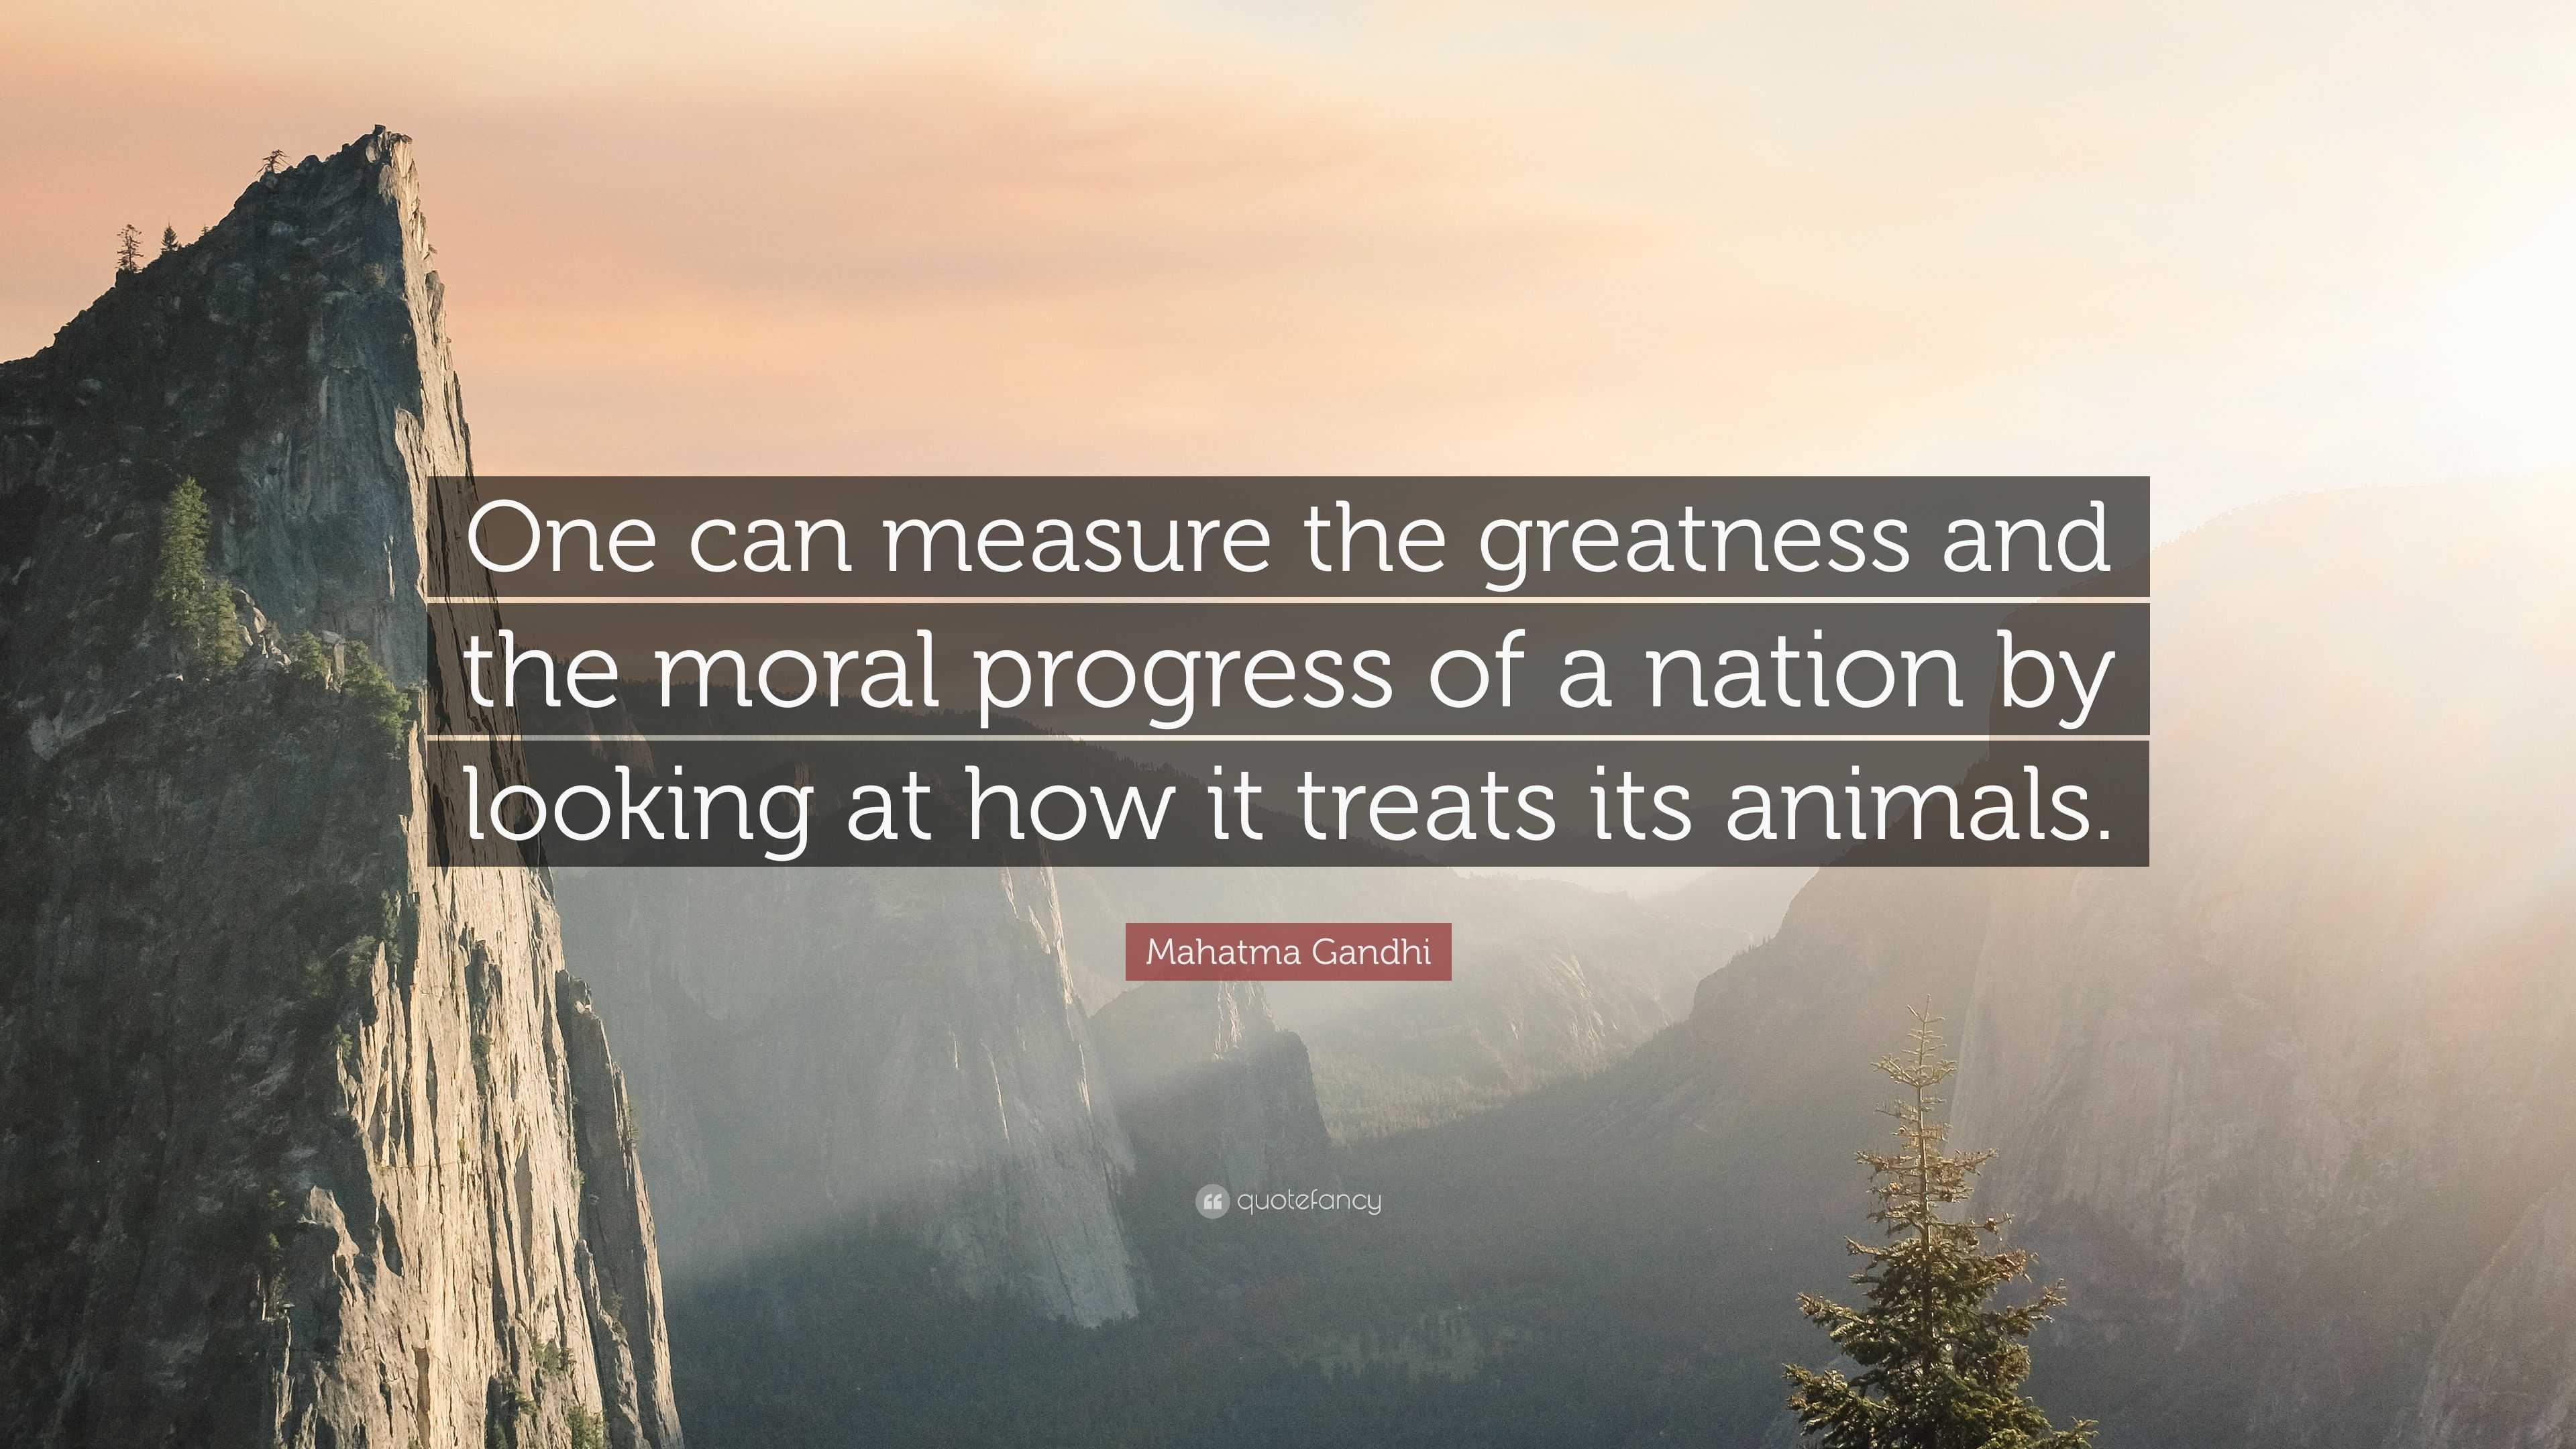 Mahatma Gandhi Quote: “One can measure the greatness and the moral progress  of a nation by